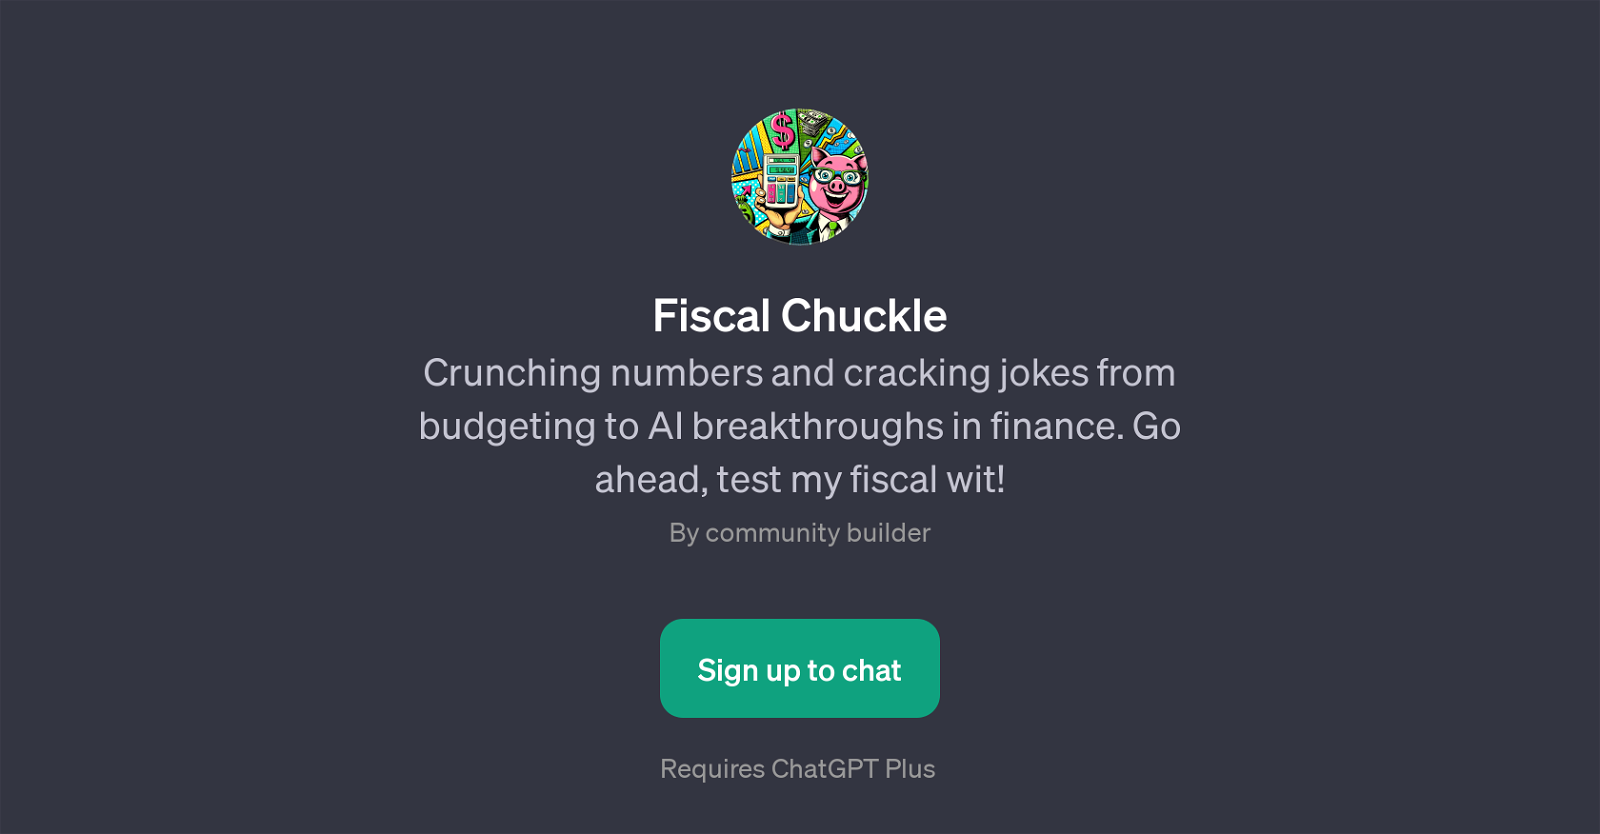 Fiscal Chuckle website